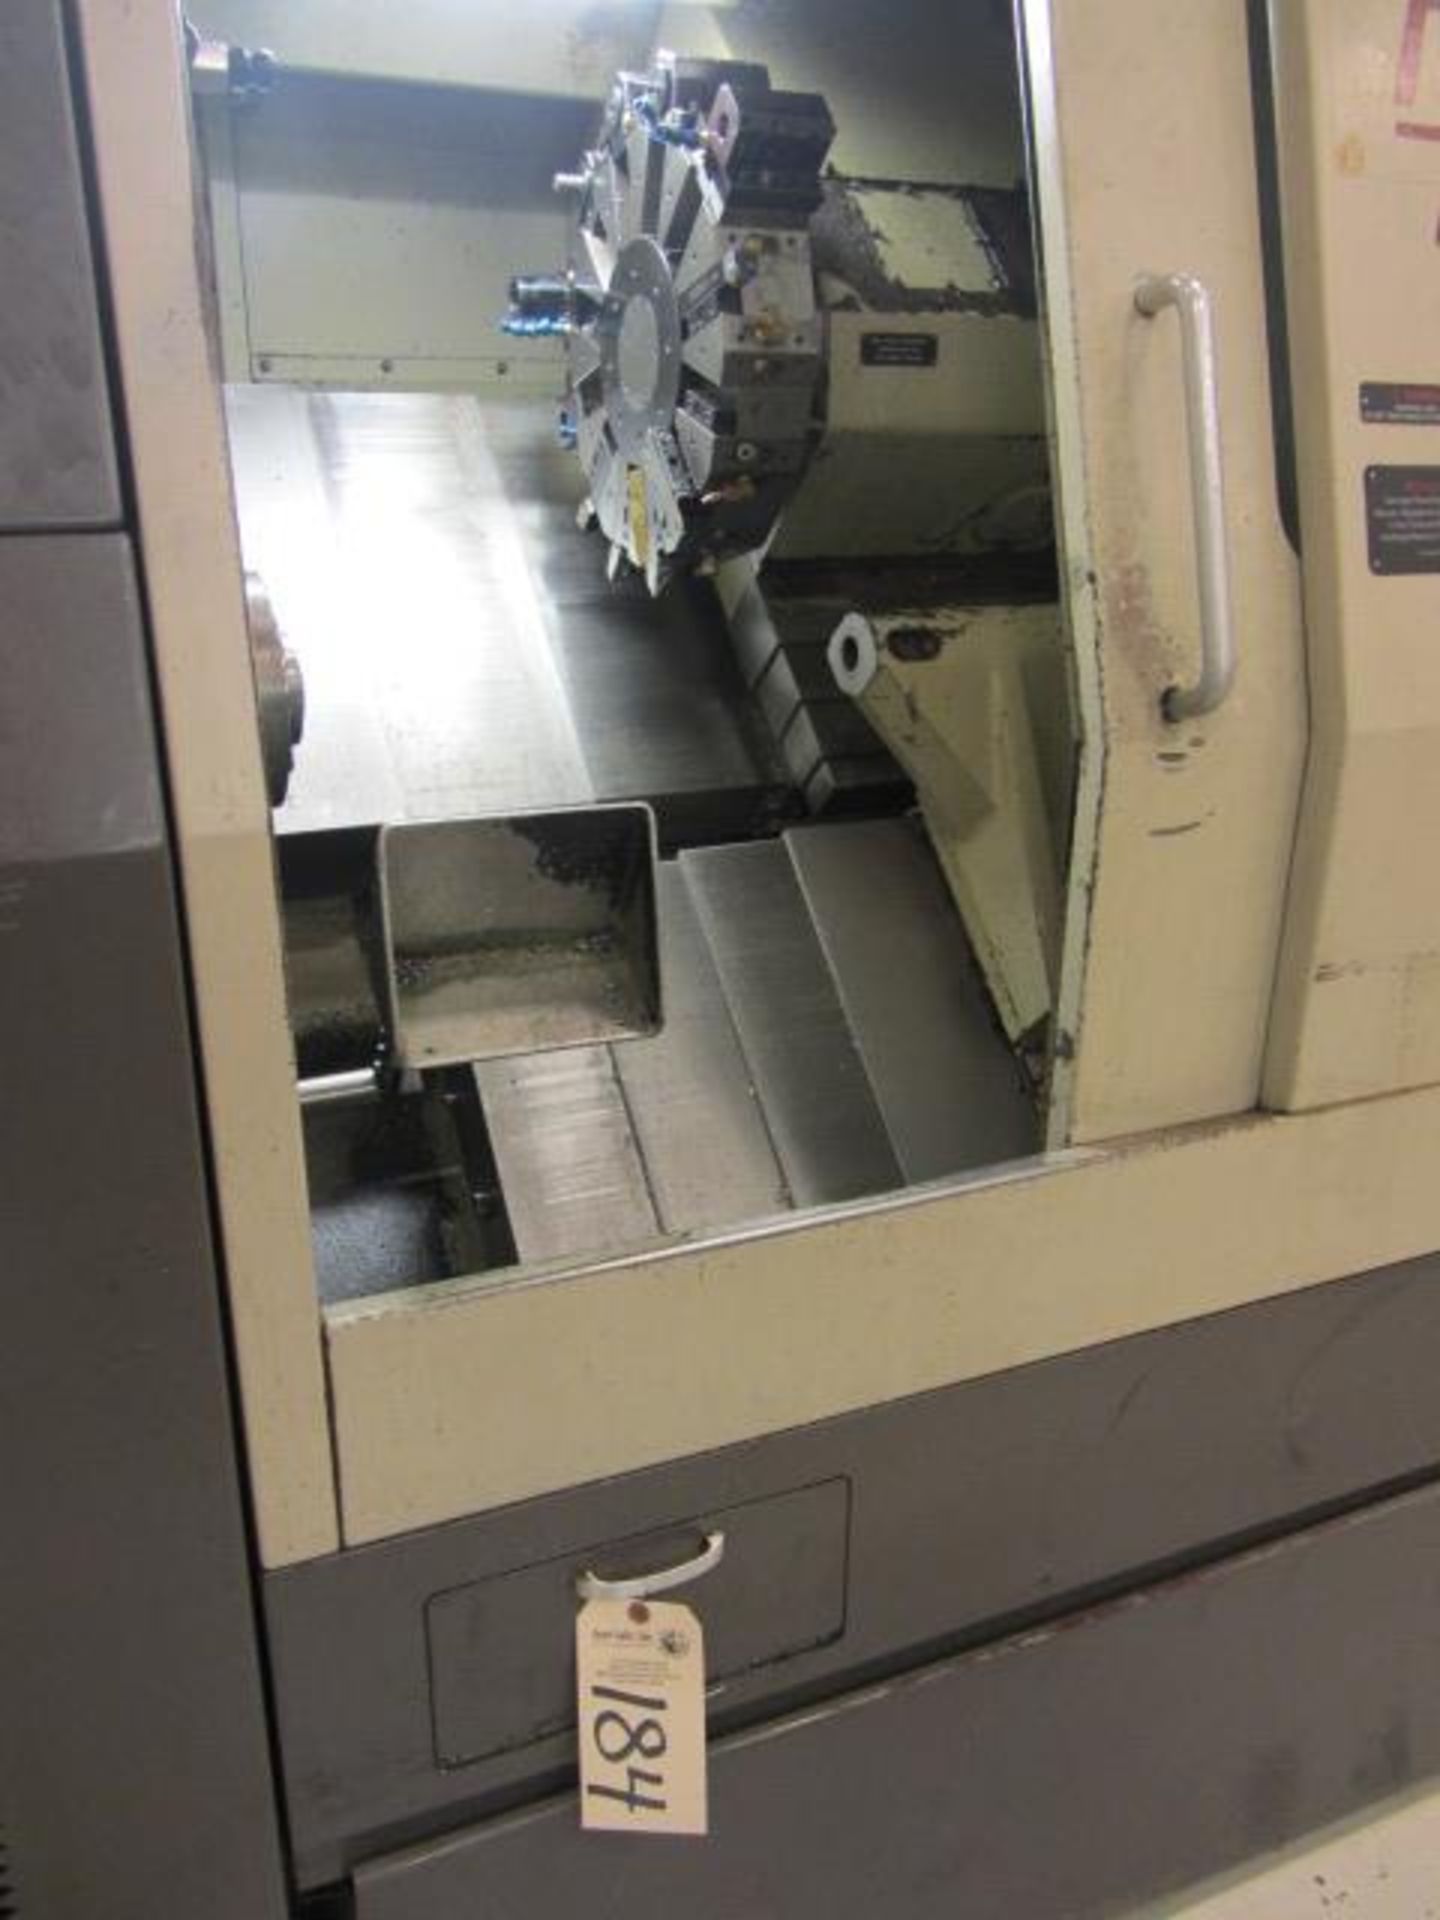 Hardinge Conquest T42 CNC Turning Center with 6'' Chuck, Collet Spindle Nose, Spindle Speeds to 5000 - Image 2 of 9